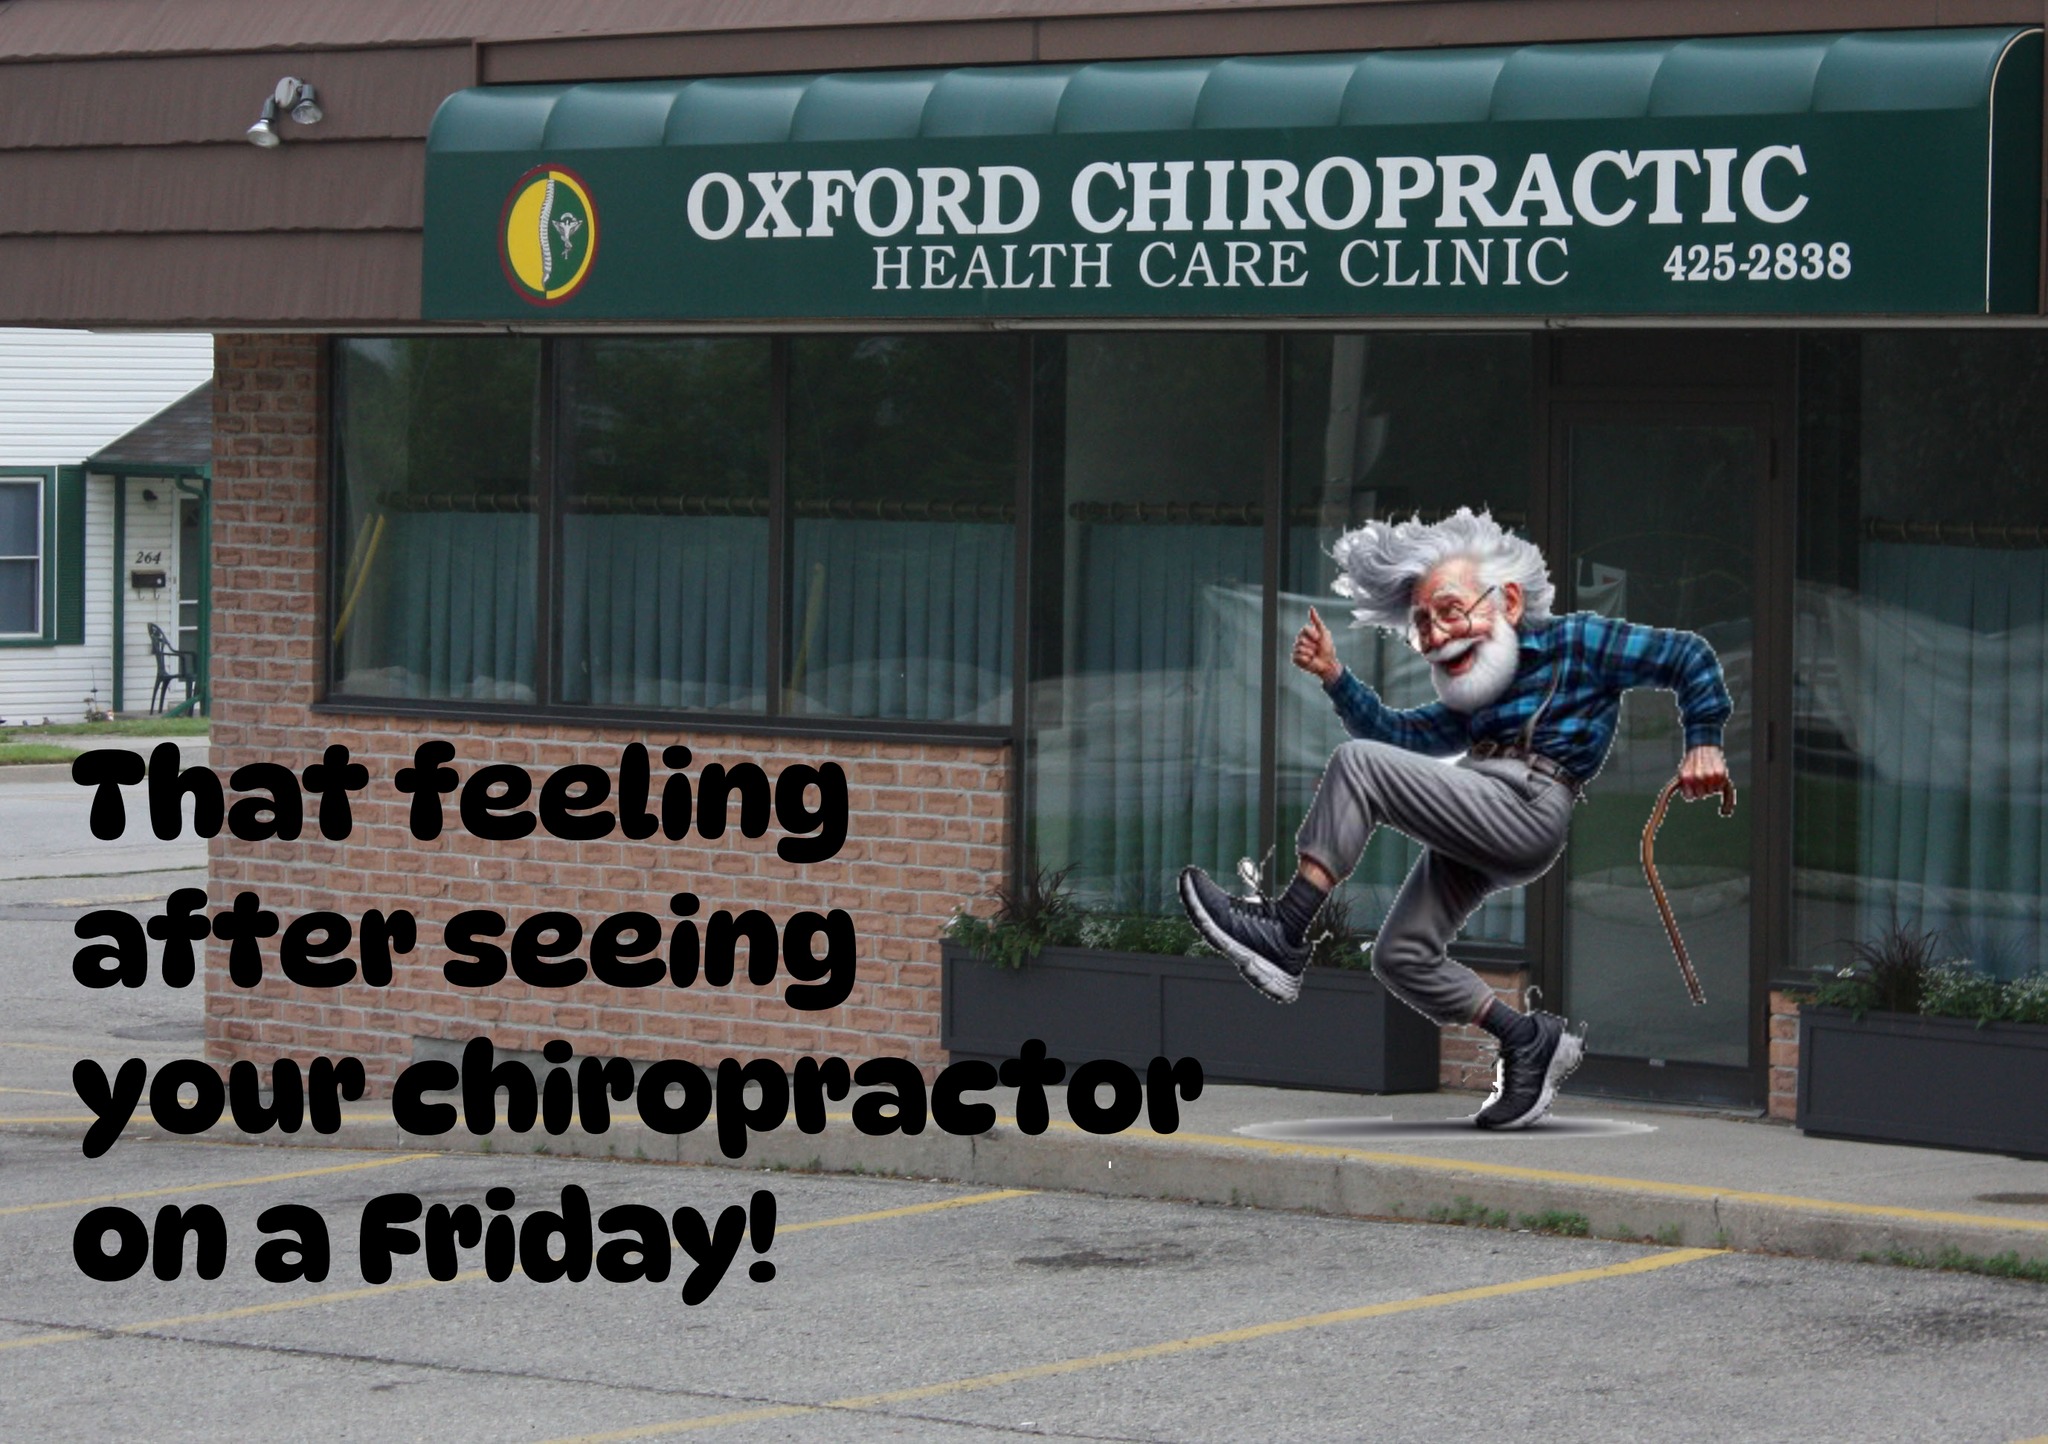 Oxford Chiropractic